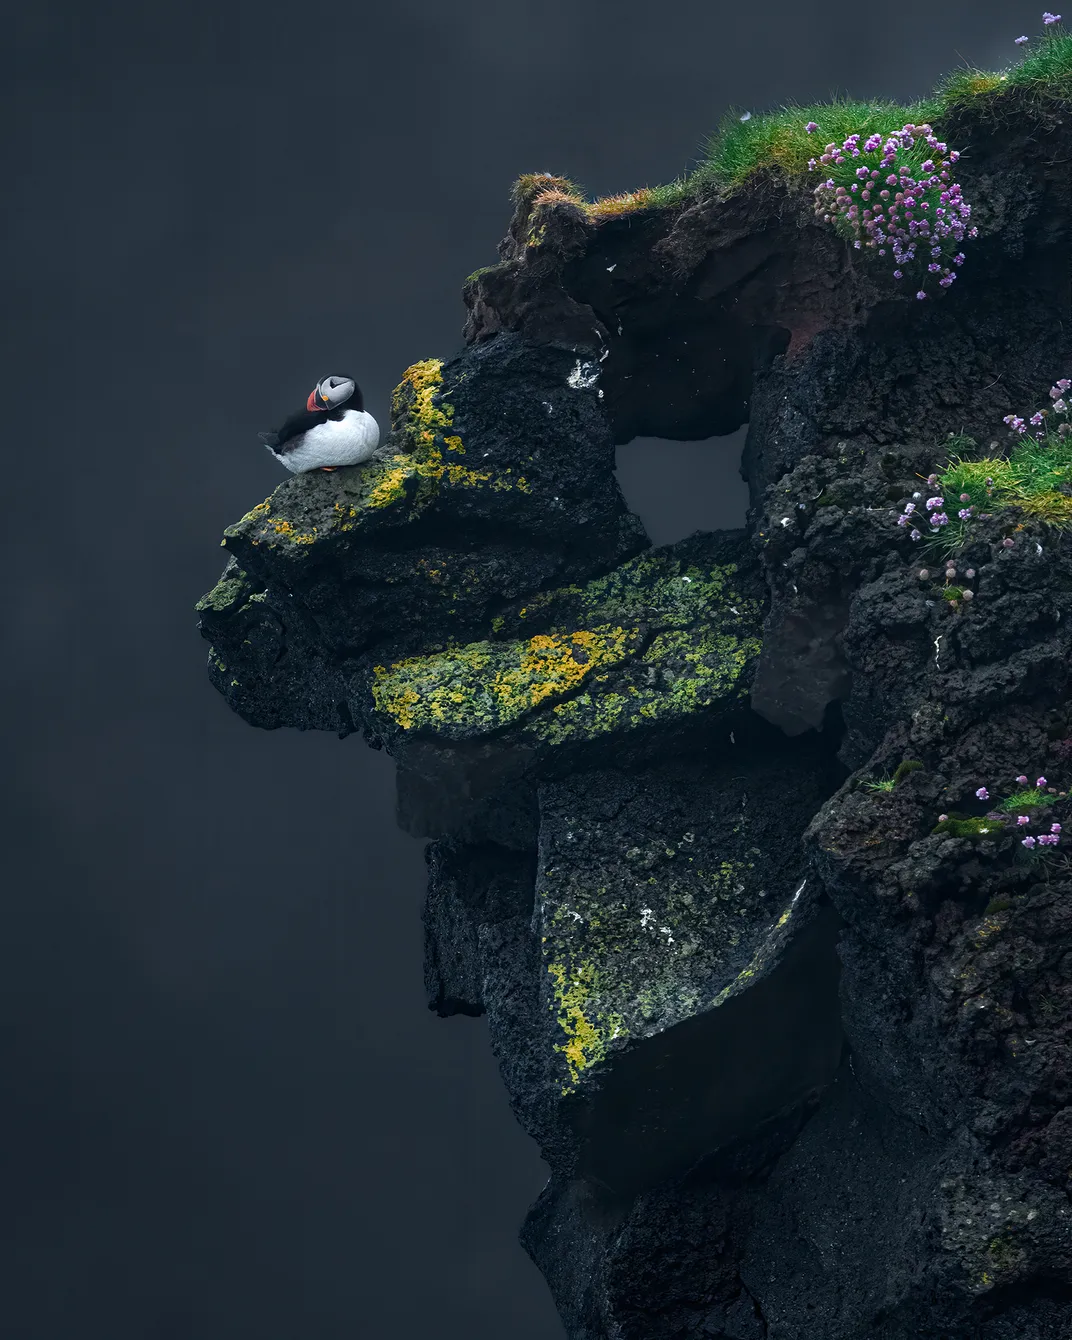 An Atlantic Puffin sits on the edge of a craggy cliffside, its head turned to the left, its white breast in sharp contrast to the gray background. Lime green algae and small purple wildflowers drape the cliff, breaking up the otherwise dark image.